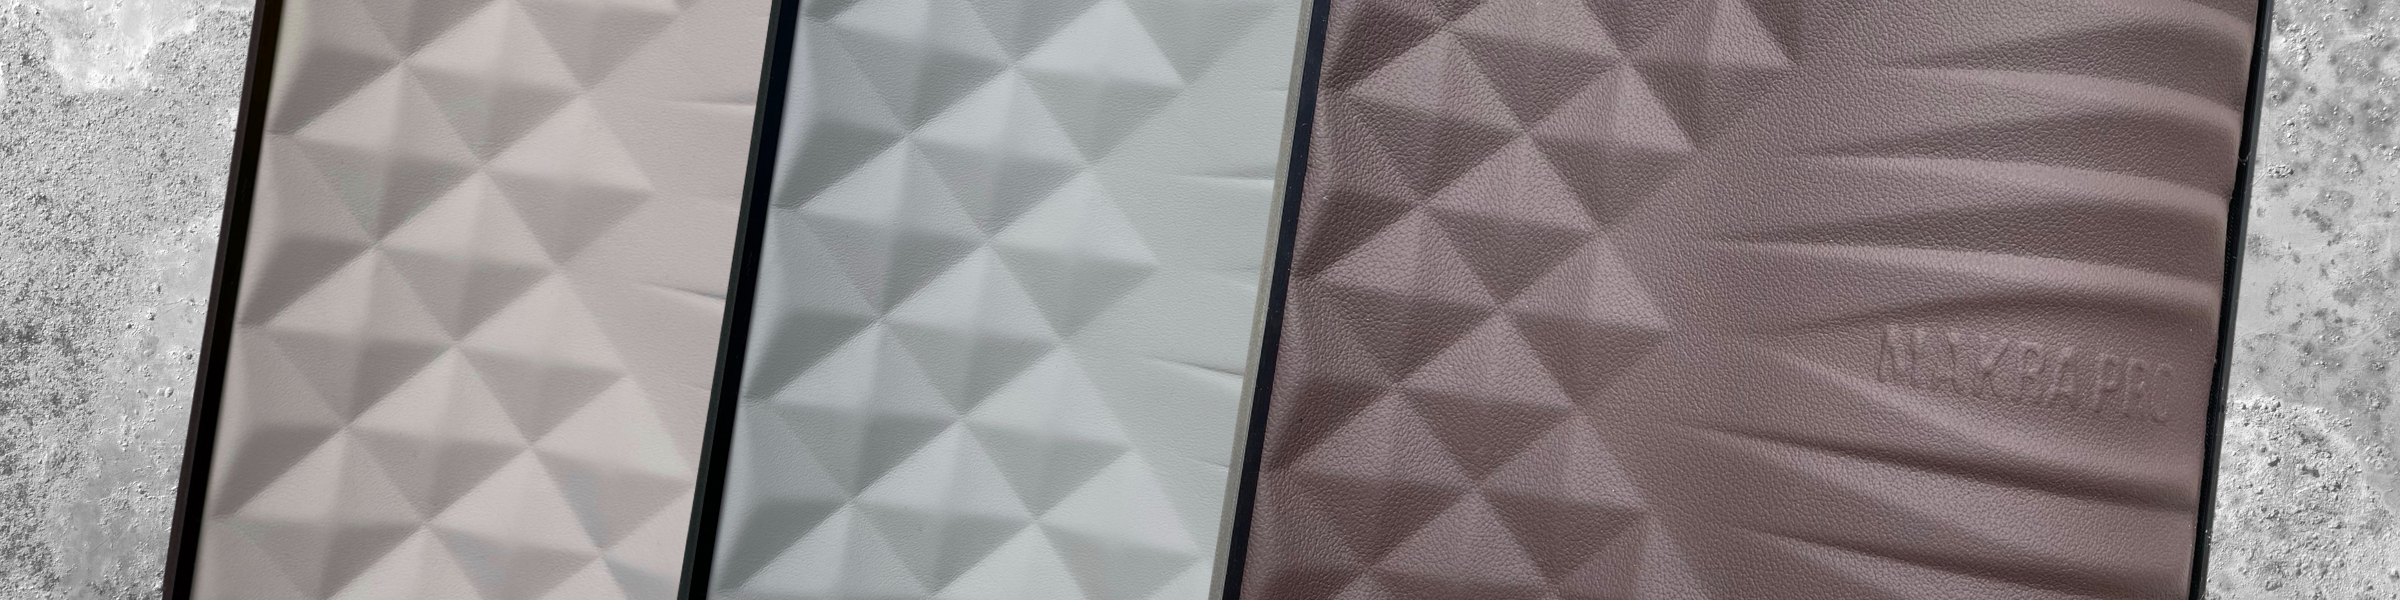 Delicate leather patterns thanks to 3D technology, MAKRA PRO, press release